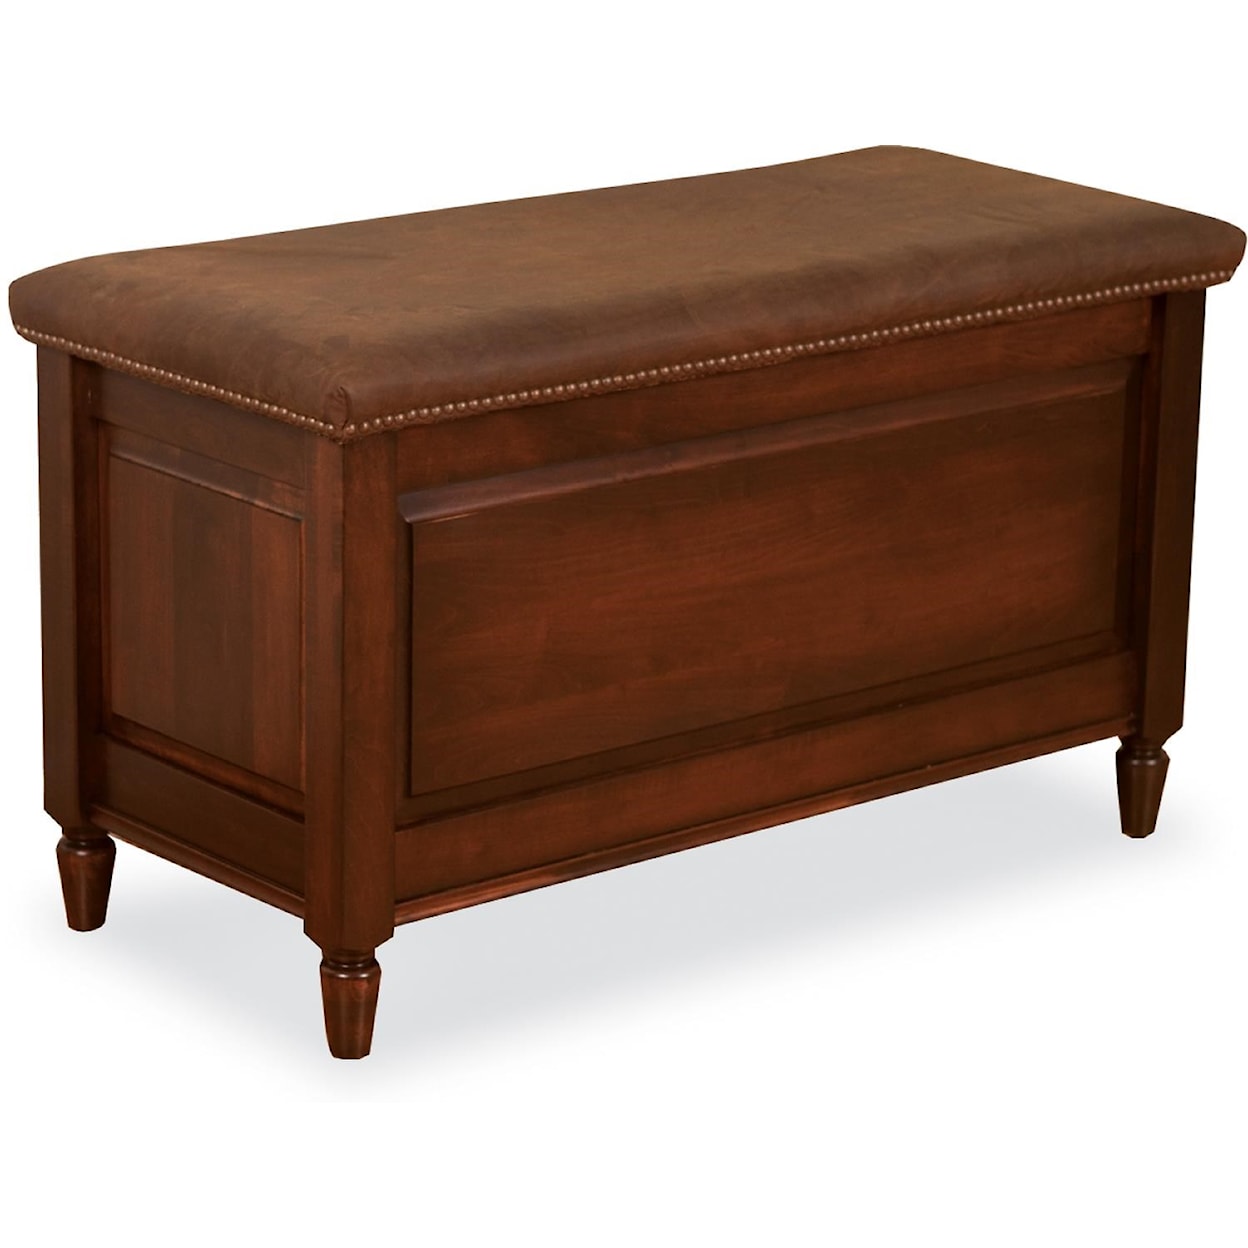 Wayside Custom Furniture Stonebriar Blanket Chest with Leather Seat